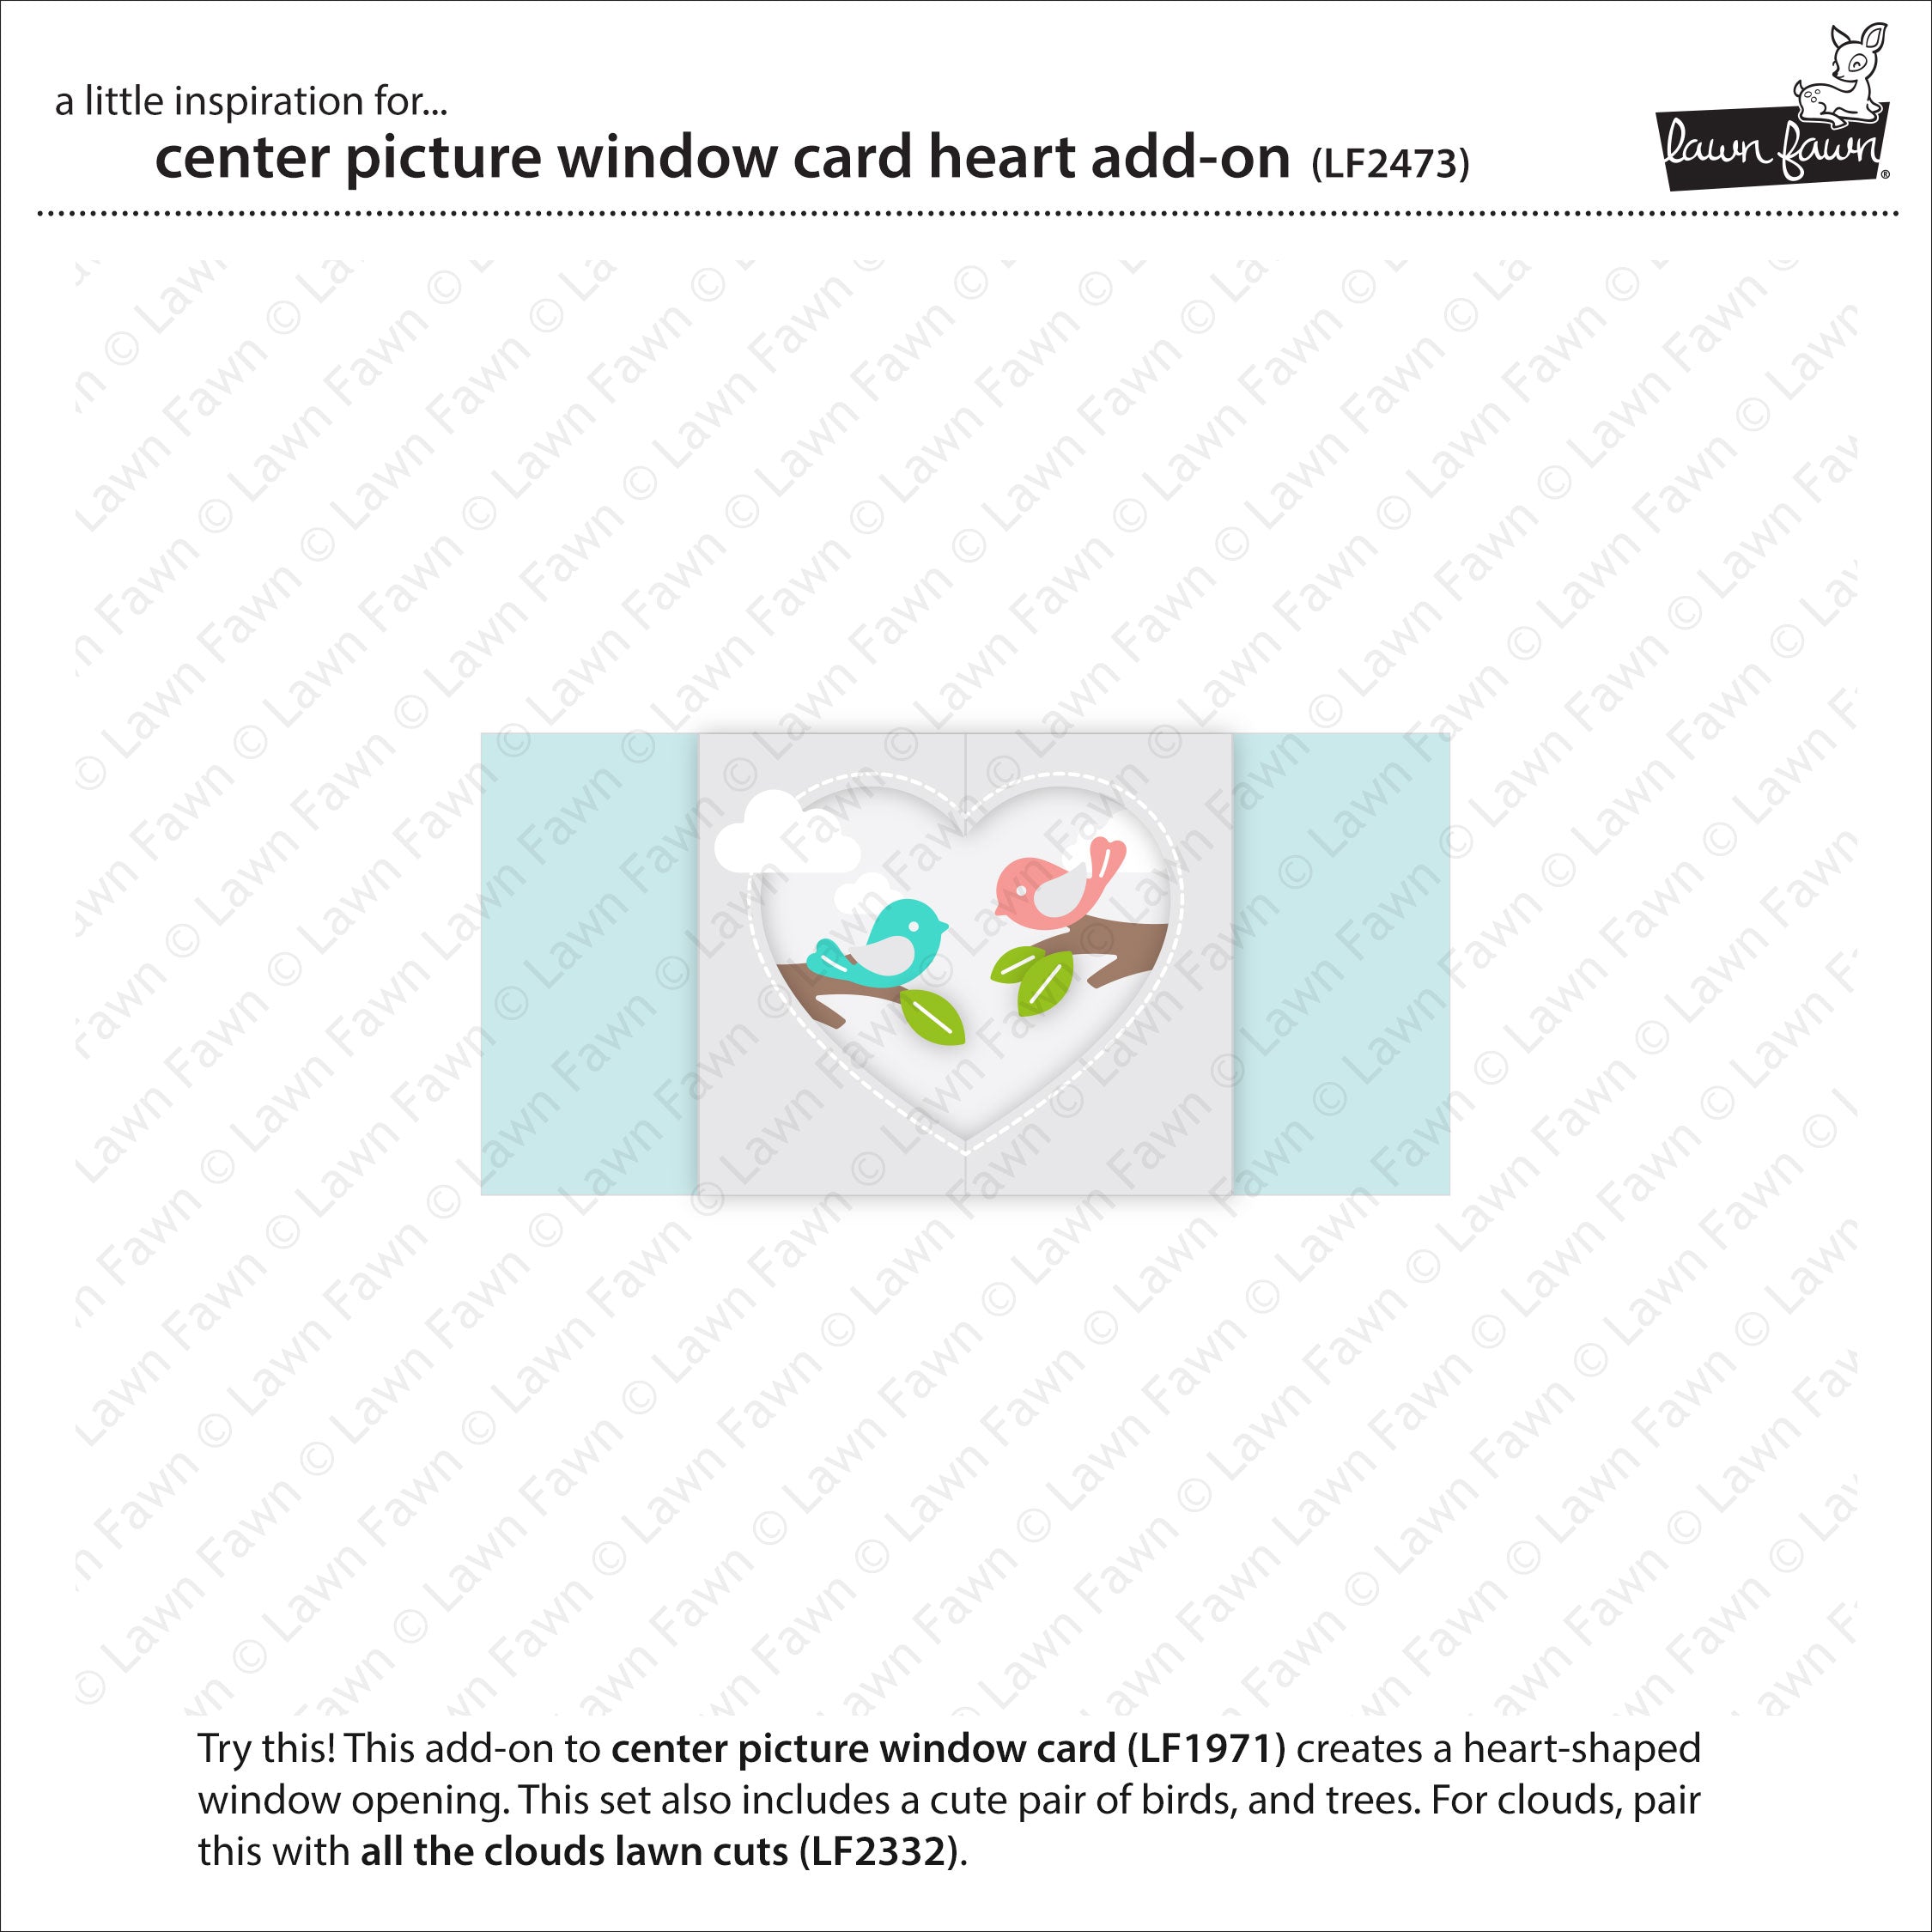 center picture window card heart add-on